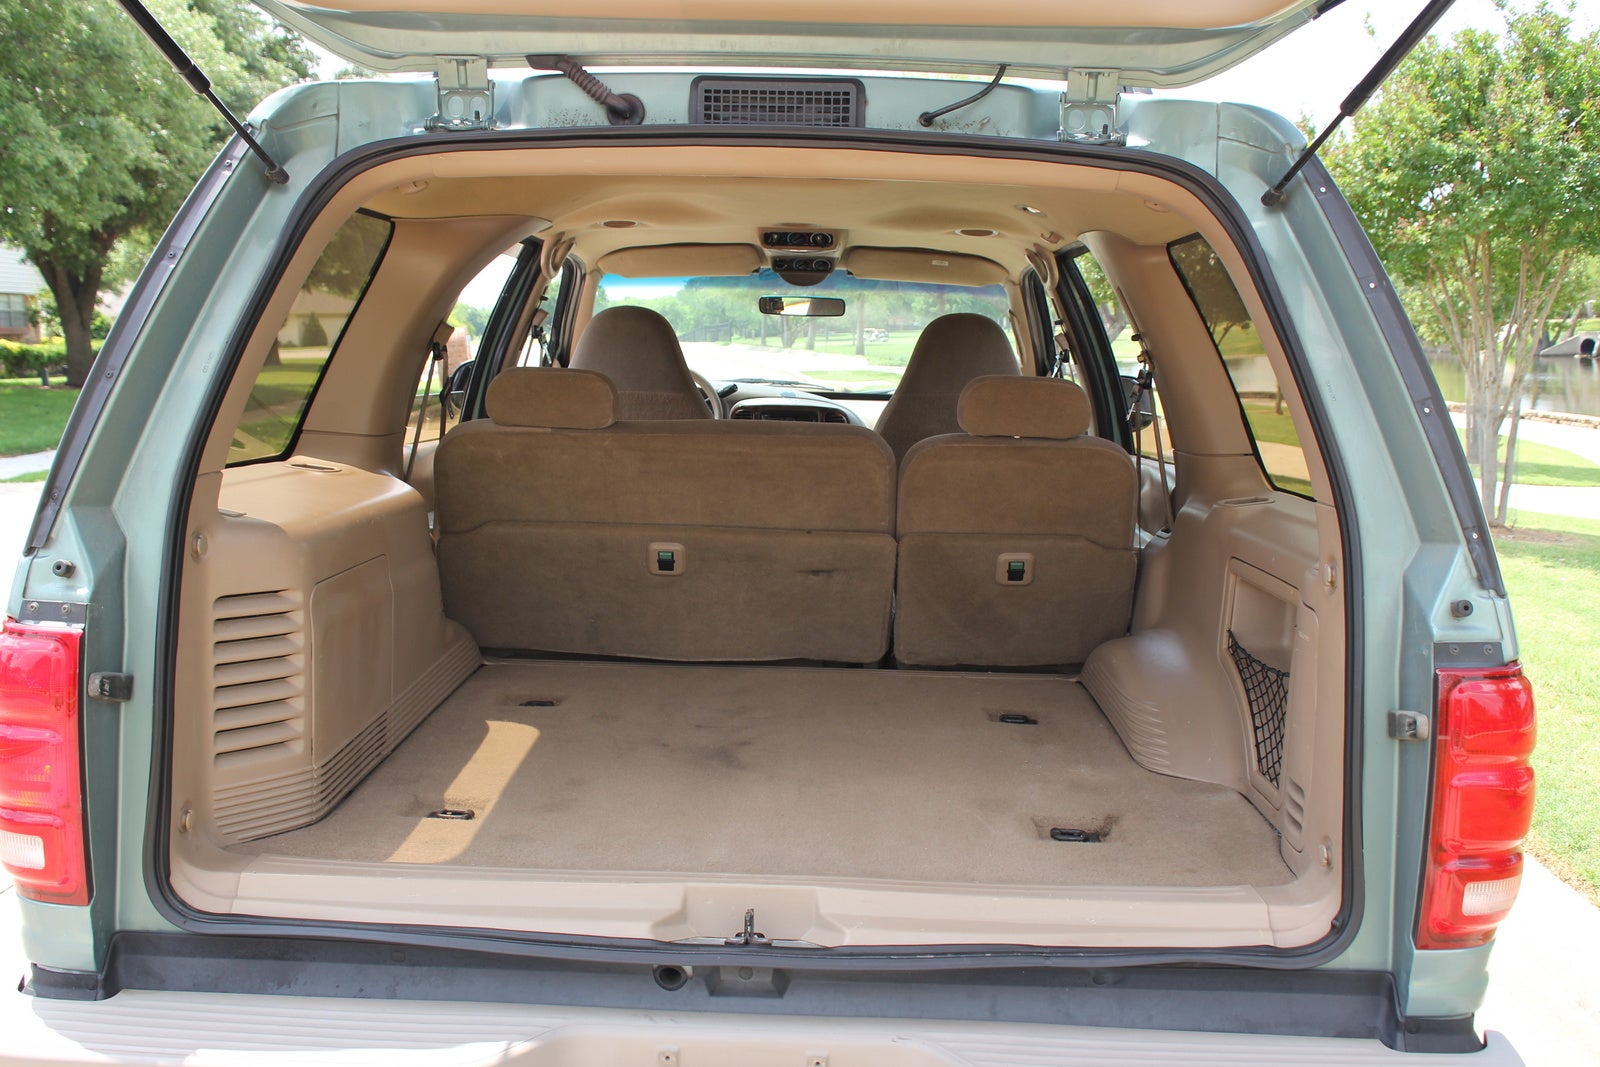 Ford expedition dimensions interior #7